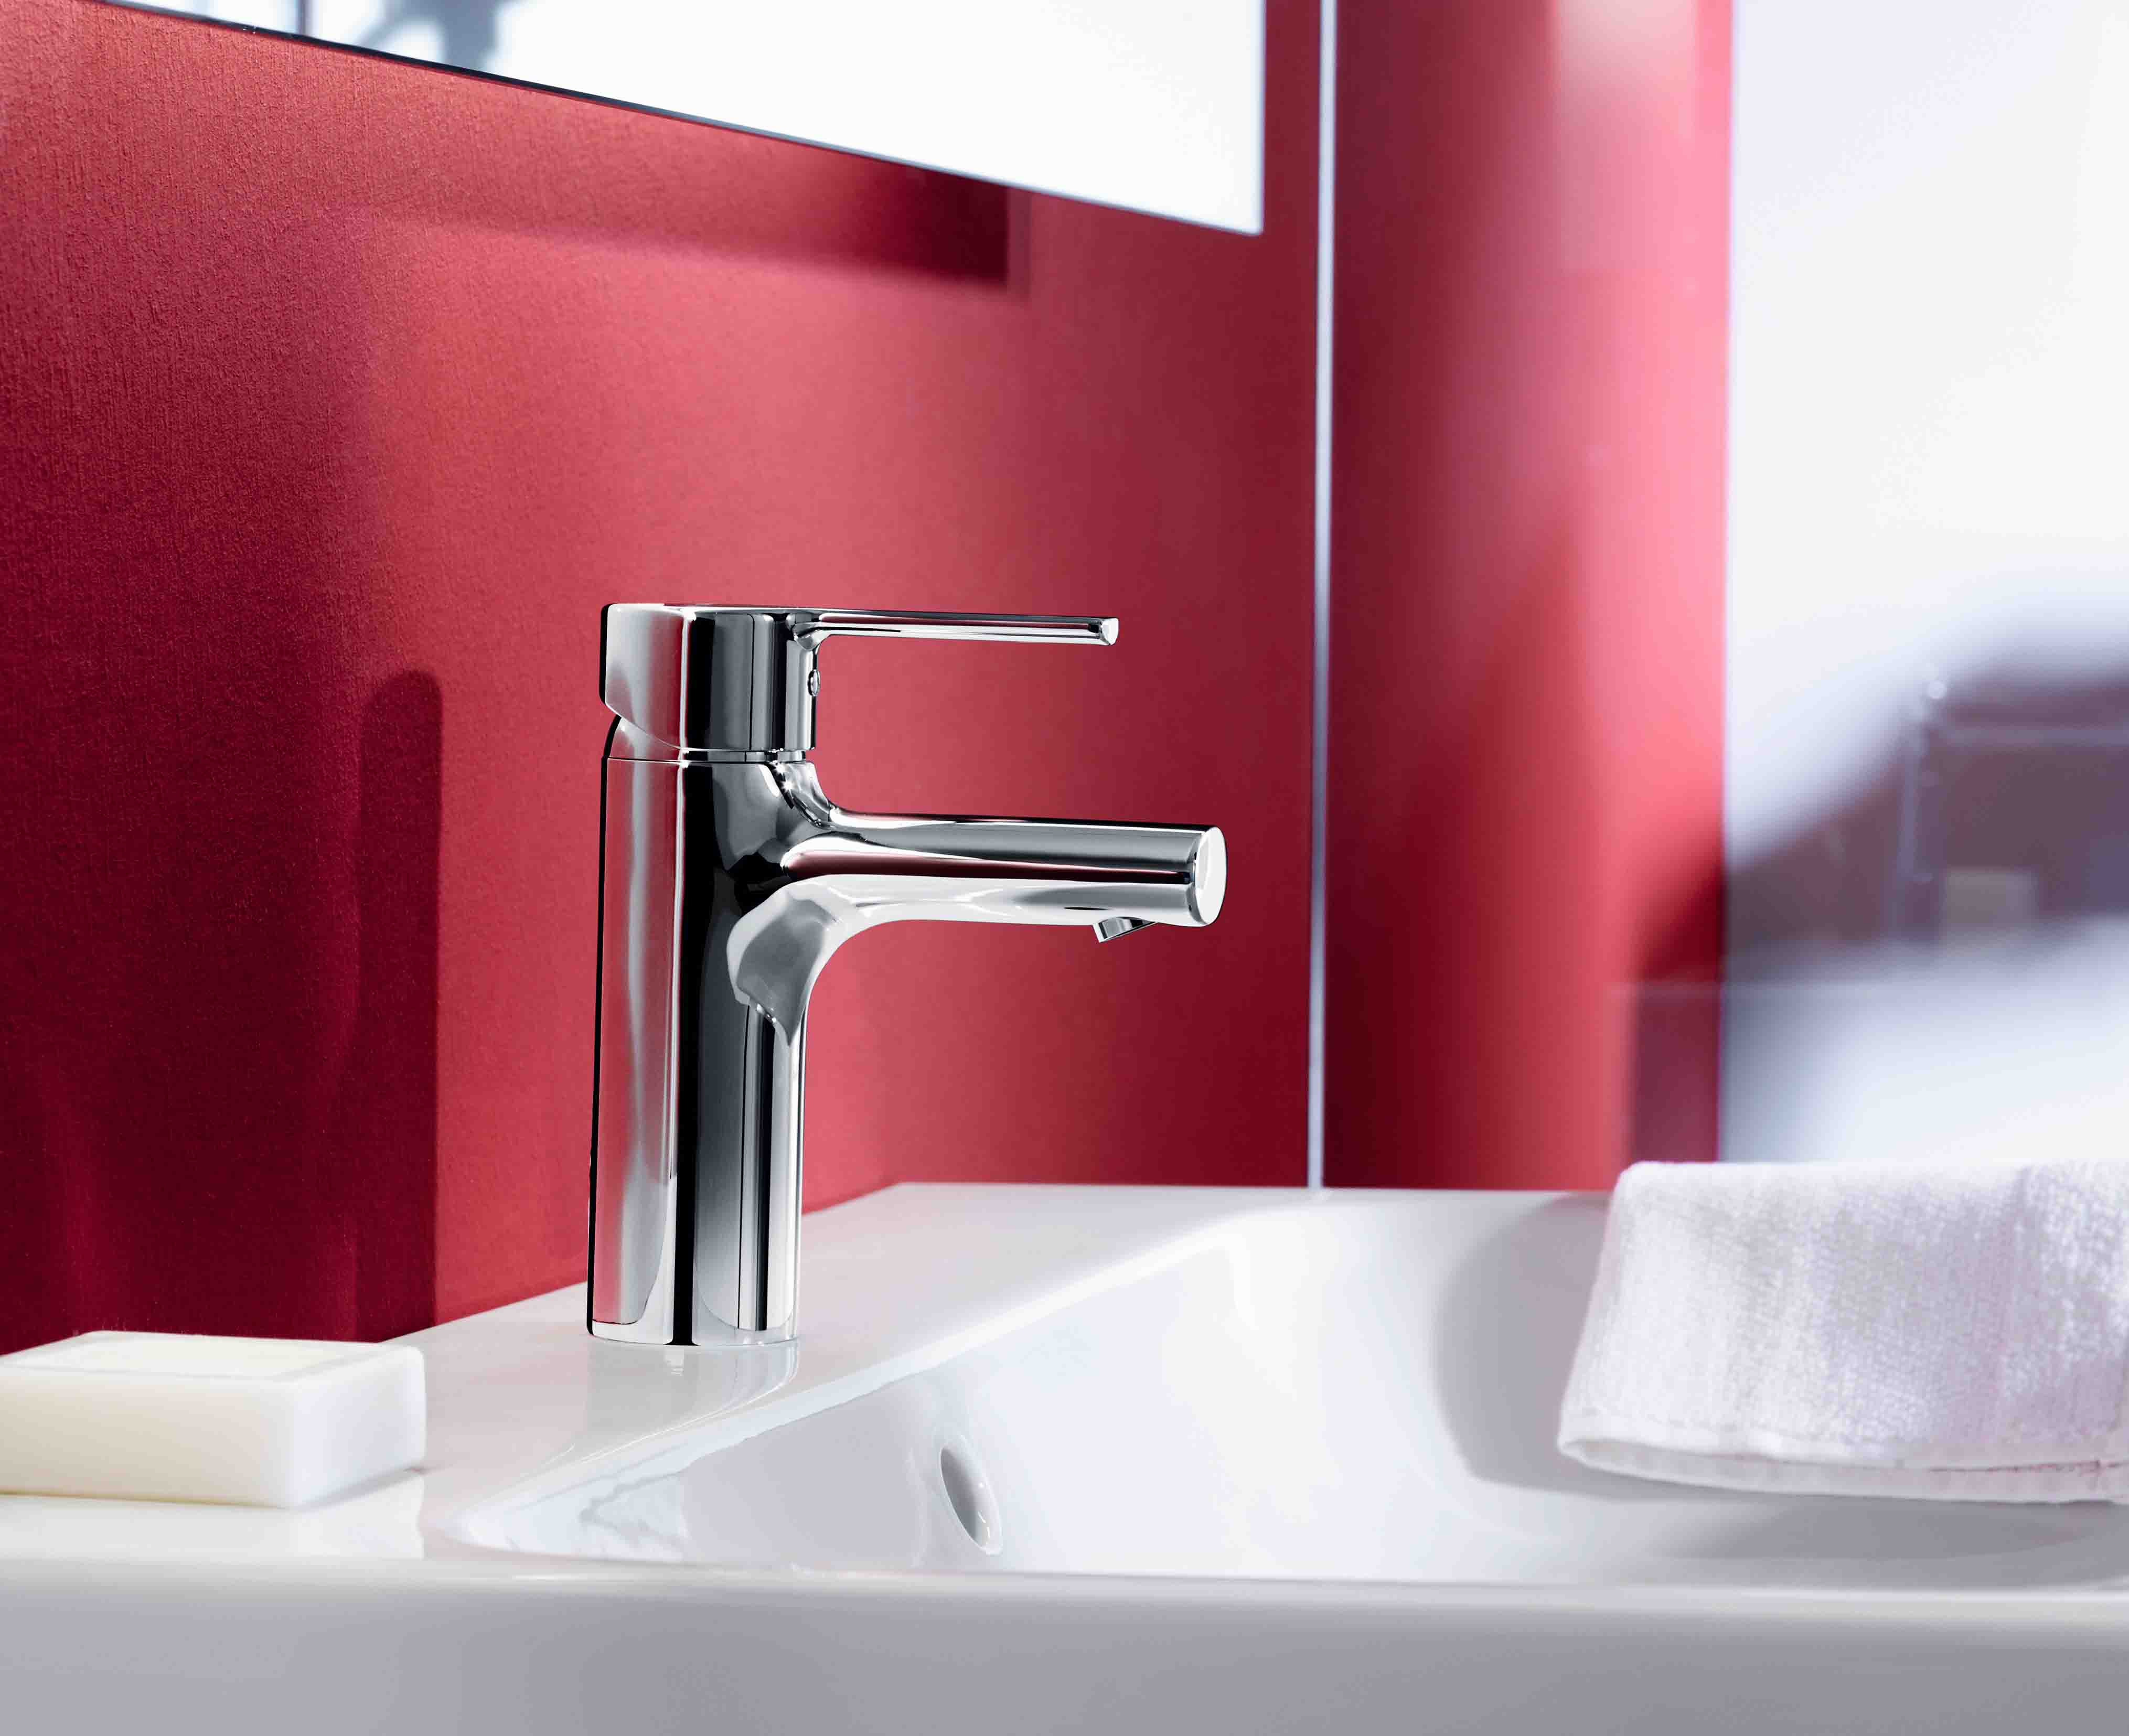 Red feature wall of bathroom showing chrome tap and white basin